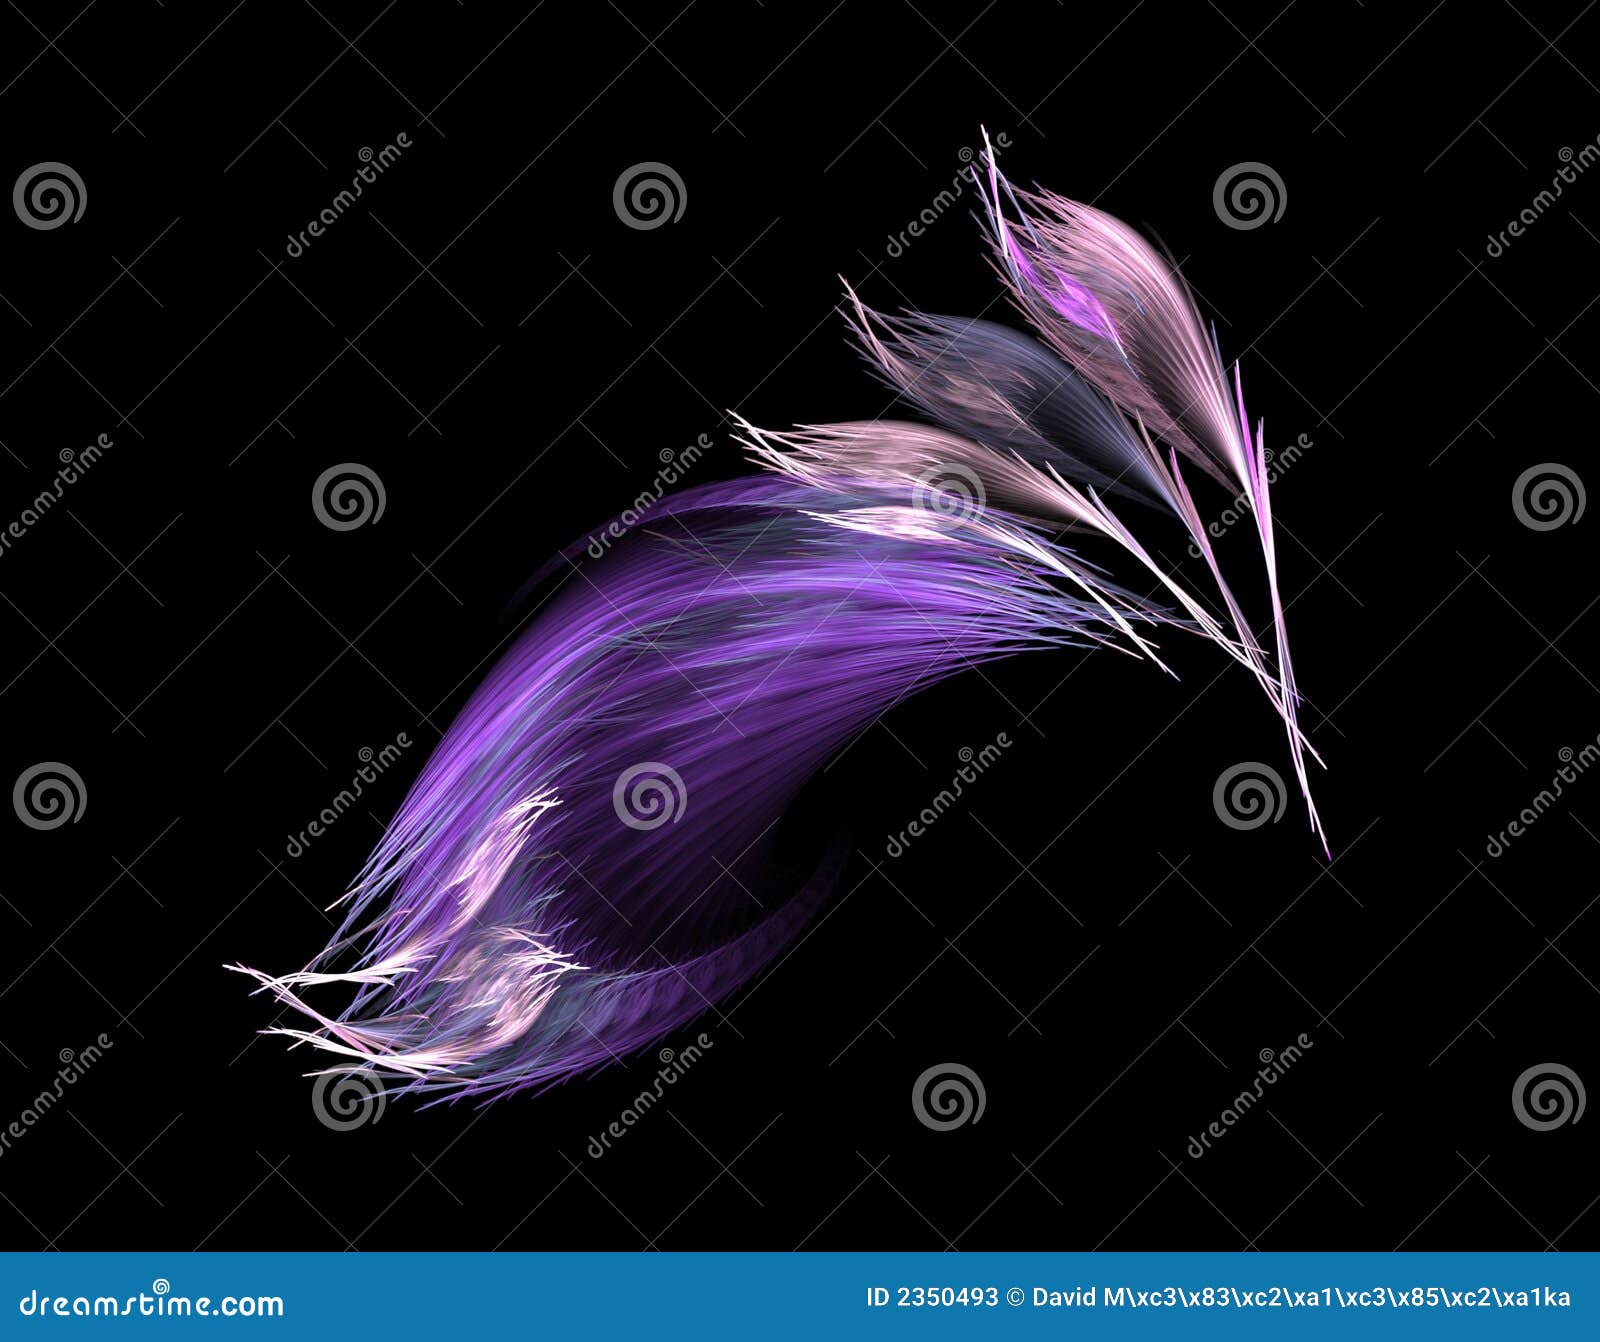 violet feathers